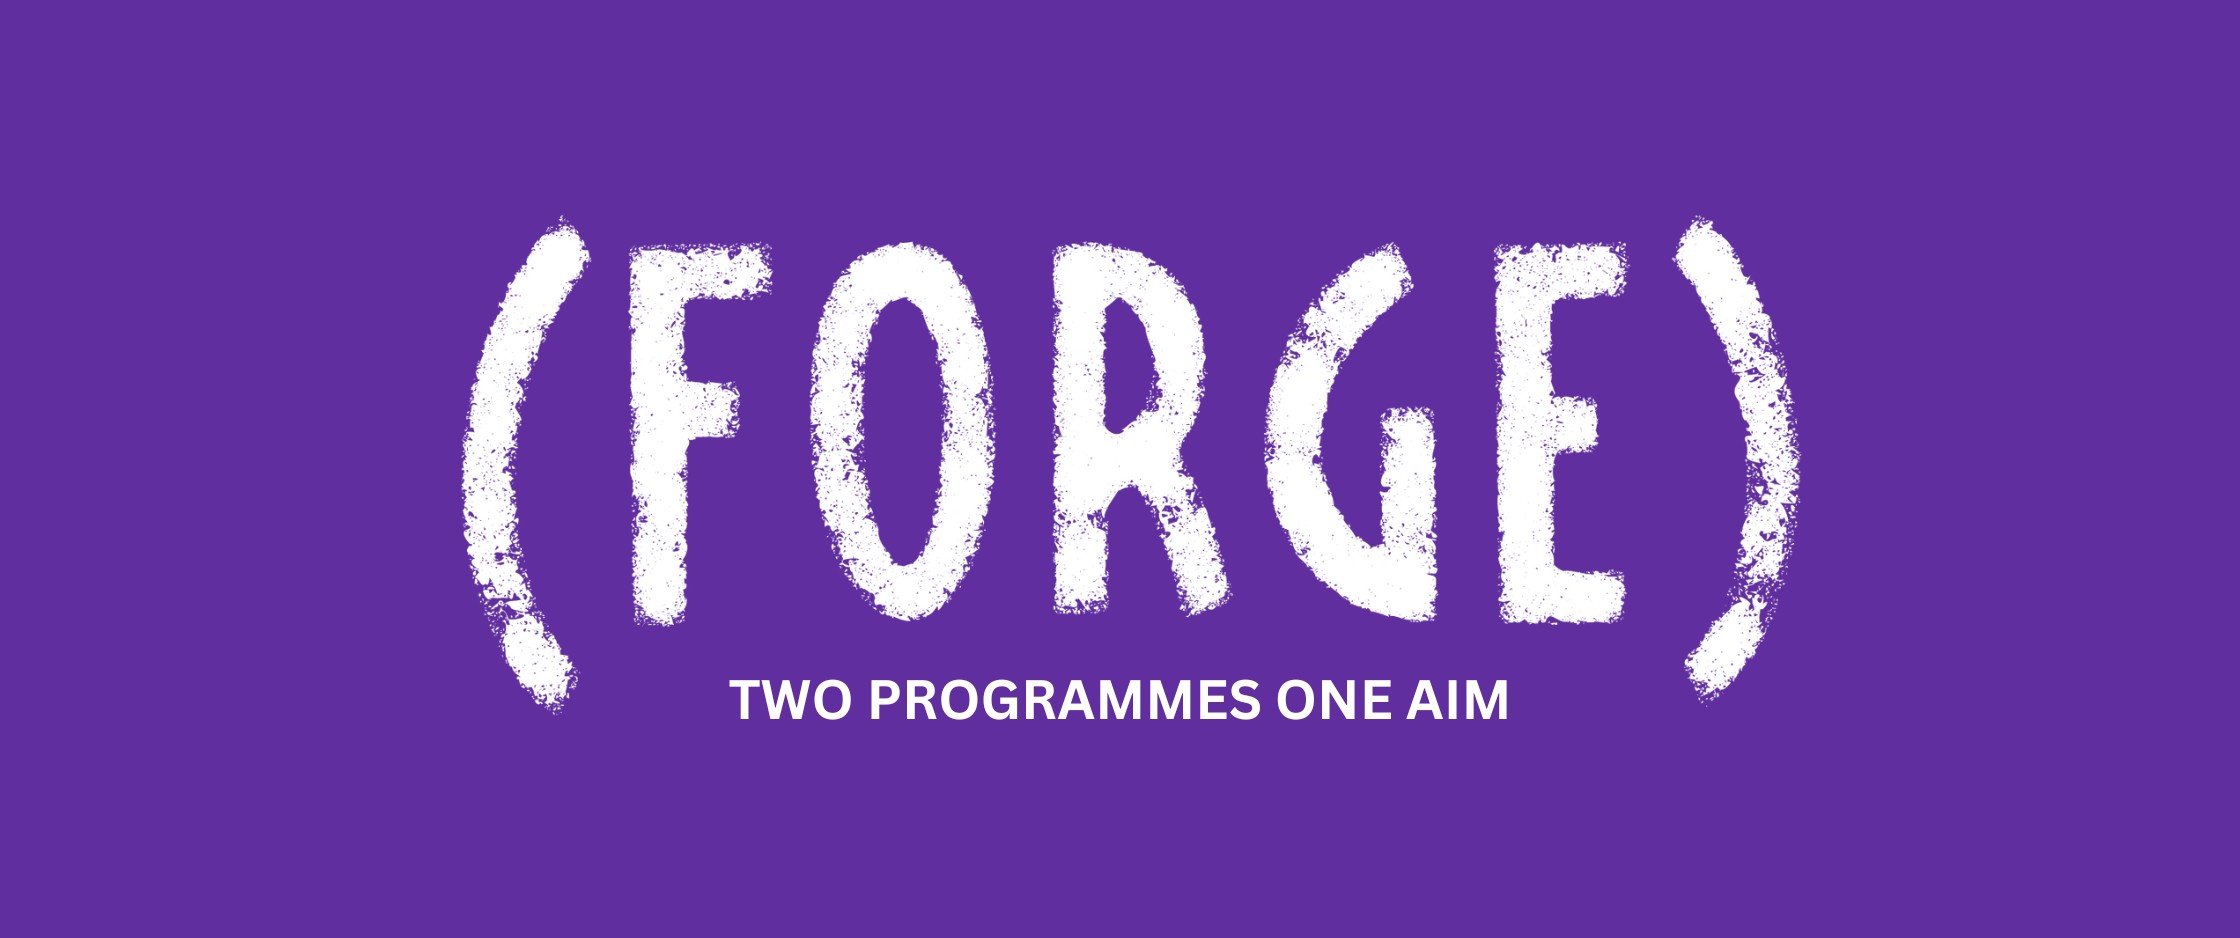 FORGE applications are open!